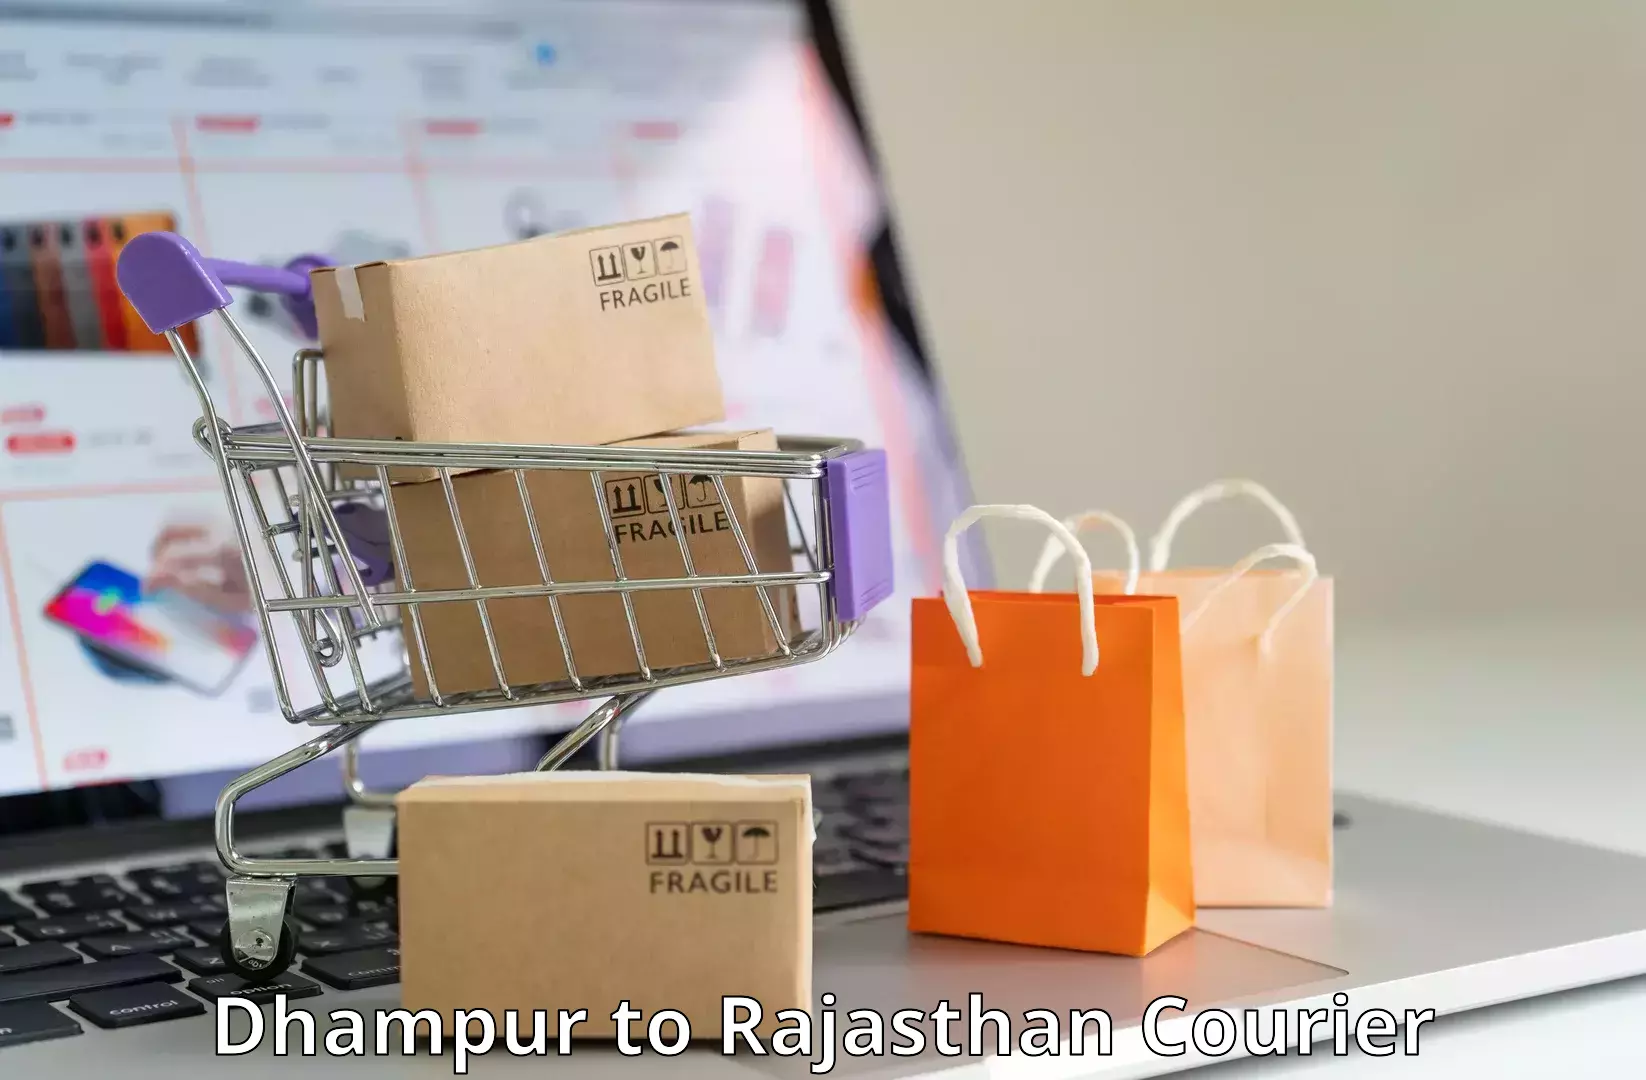 Express delivery capabilities Dhampur to Chomu